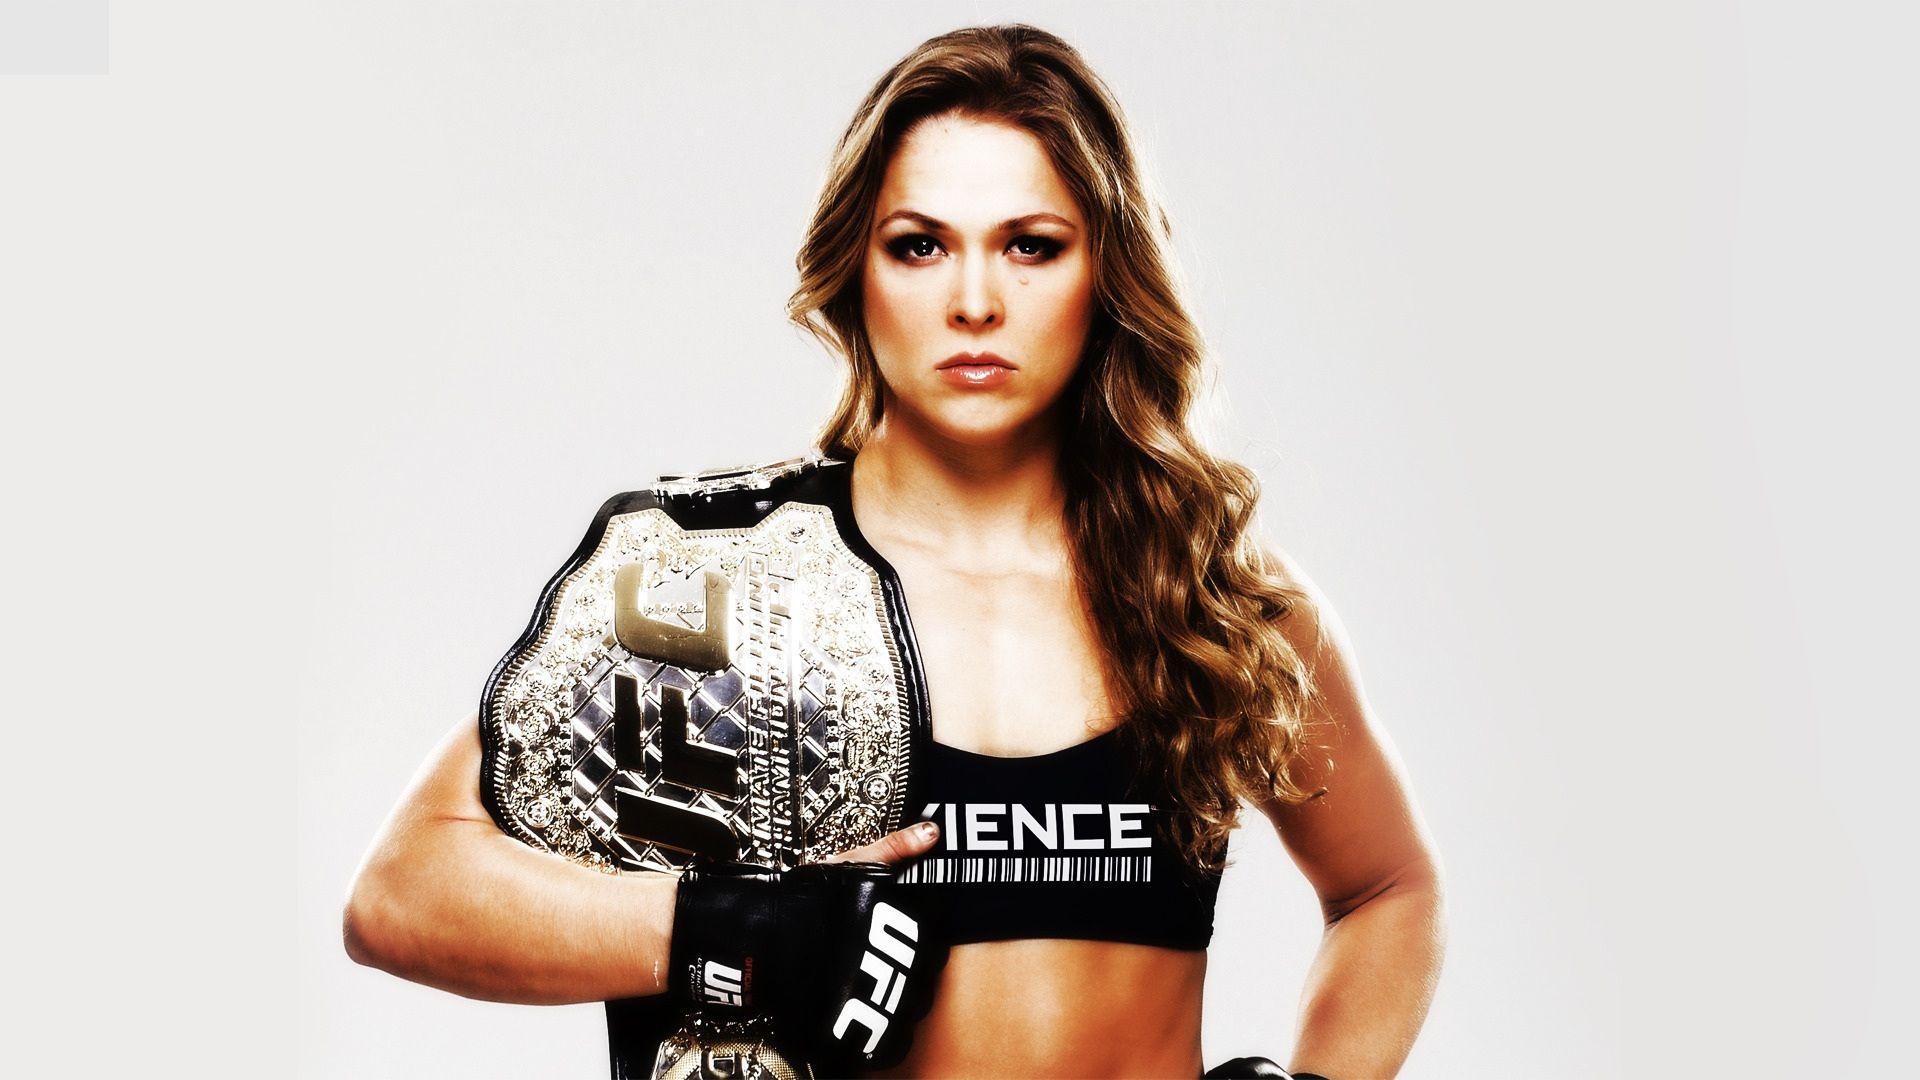 Ronda Rousey Wallpaper, Picture, Image